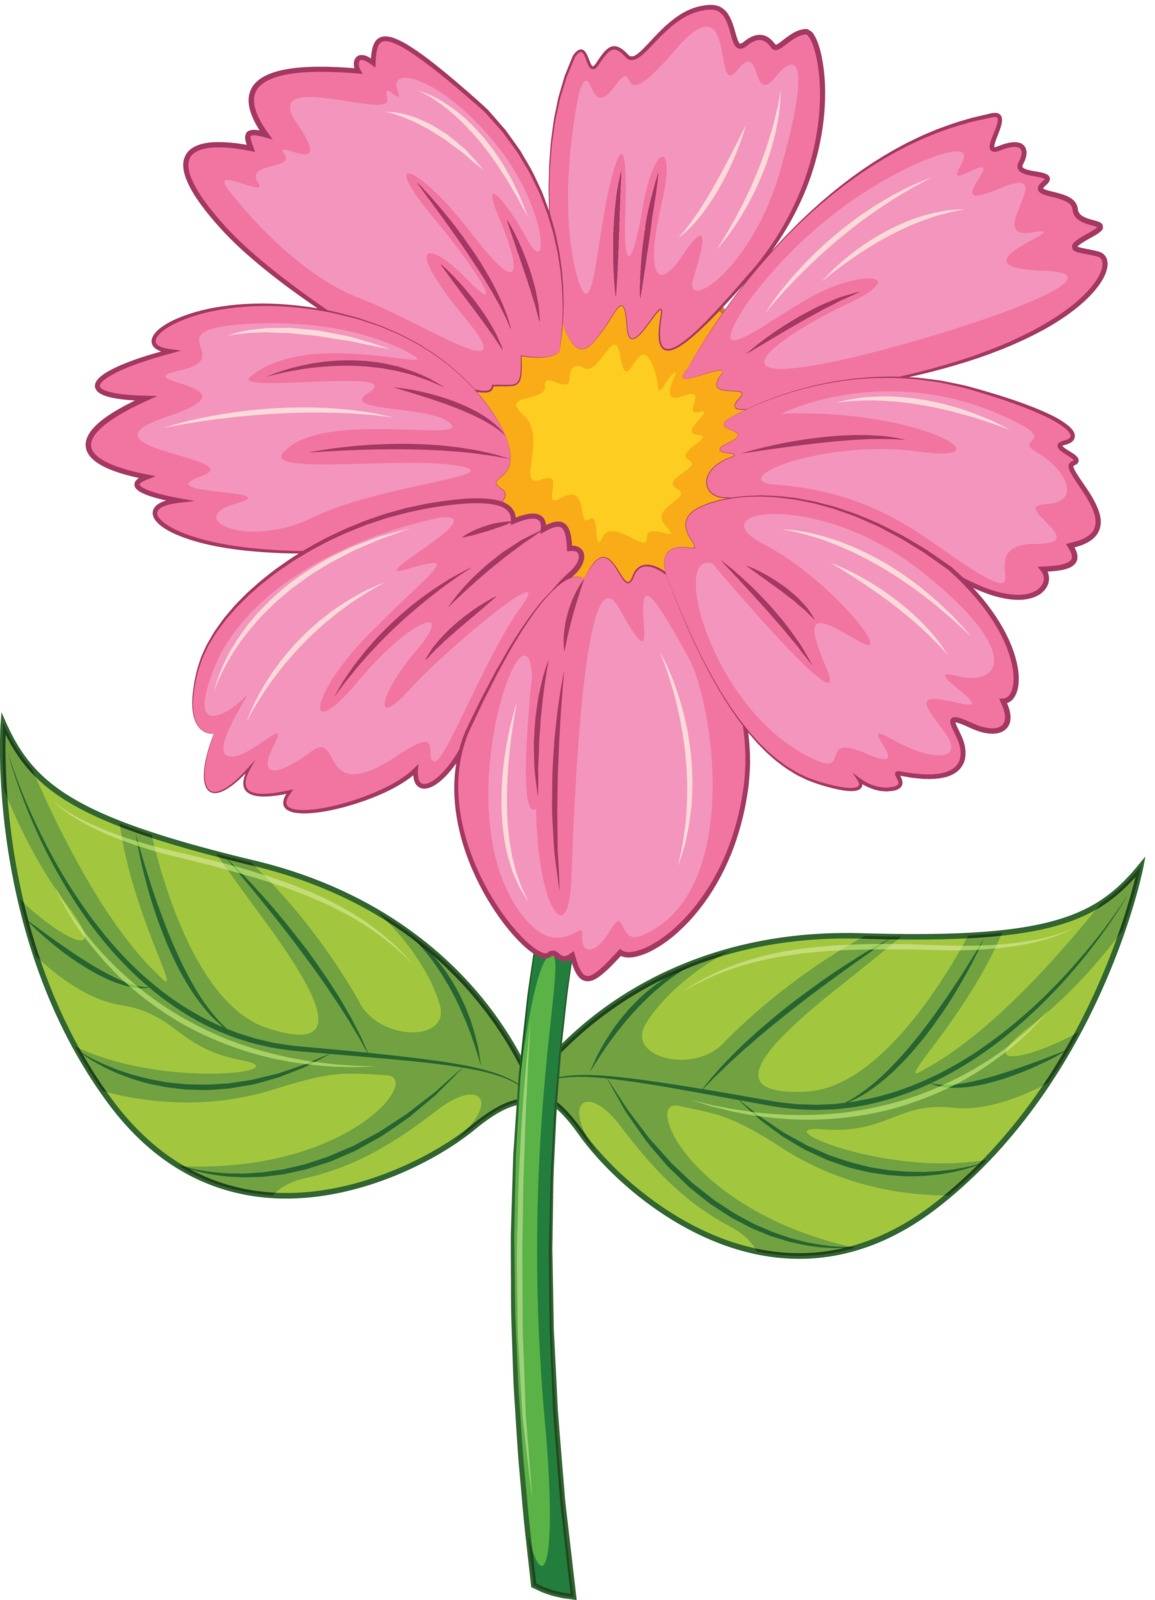 Illustration of a pink flower on a white background